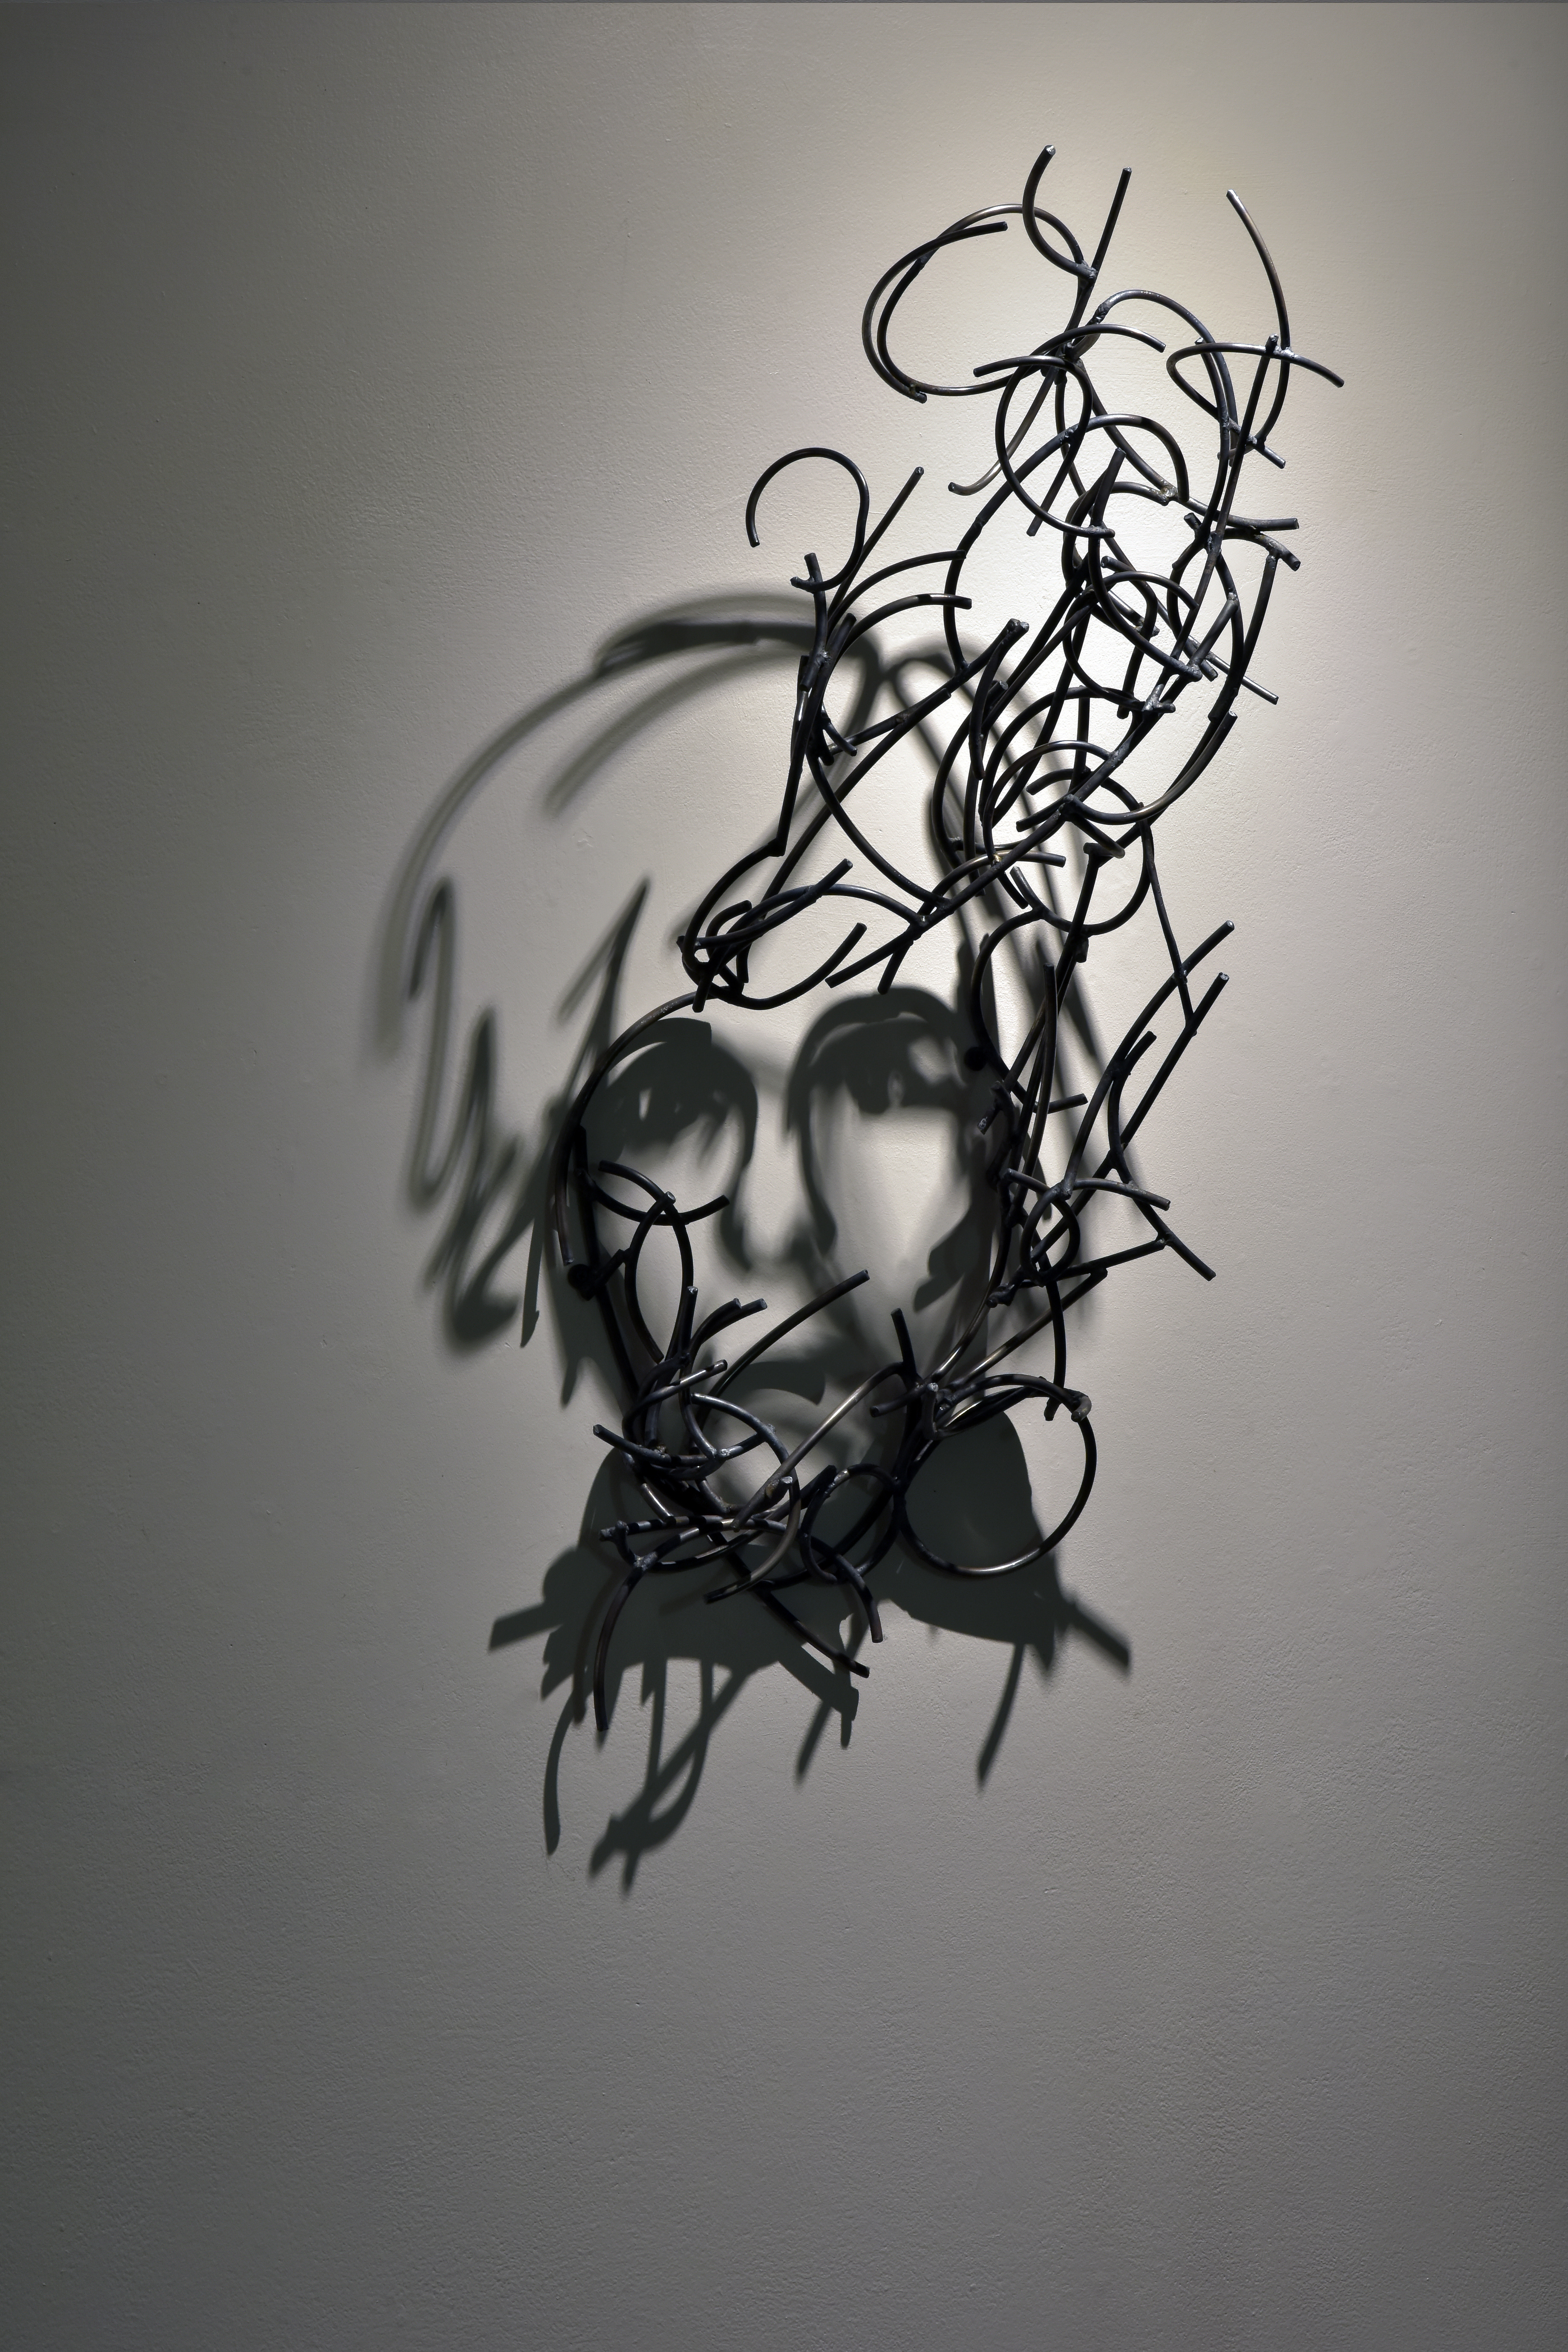 Larry Kagan's metal sculpture hanging on the wall, casting a shadow that looks like a portrait of andy warhol.